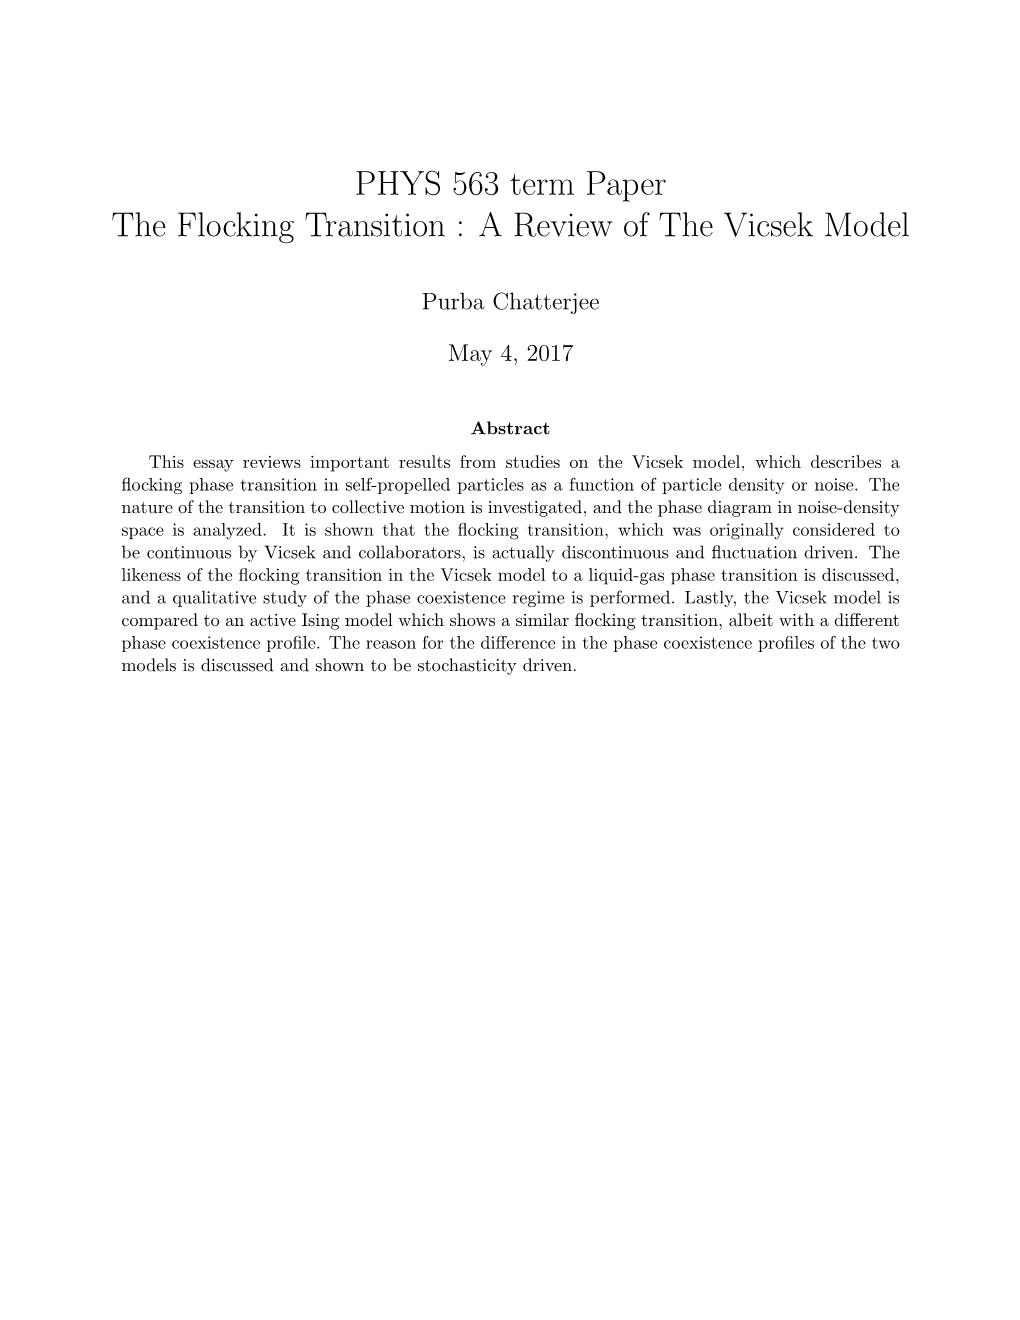 The Flocking Transition: a Review of the Vicsek Model